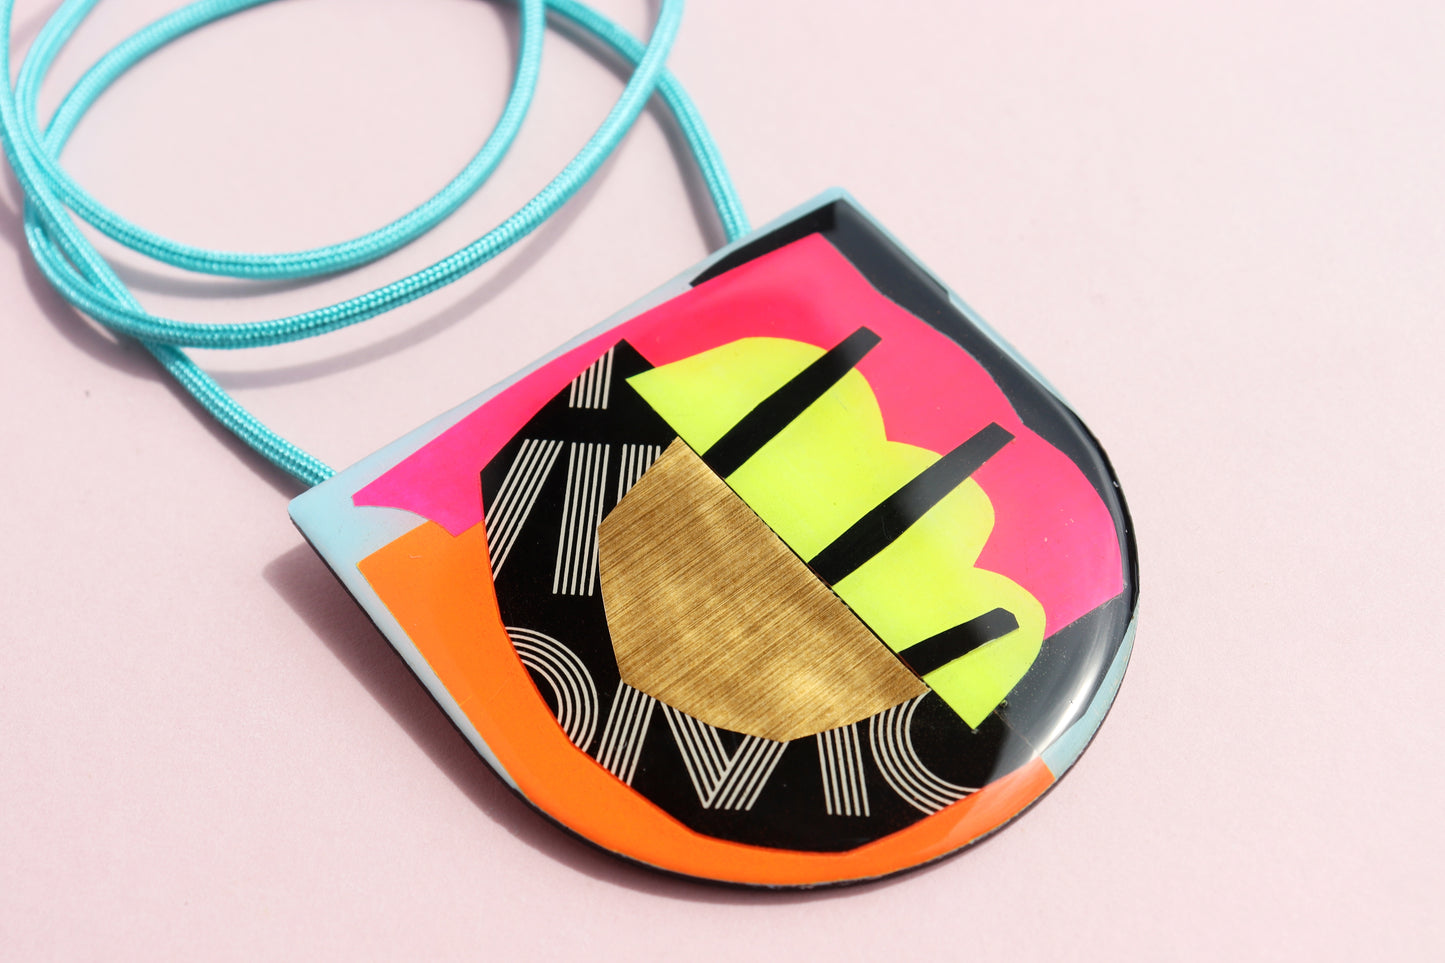 "Méduse" / One of a kind upcycled vinyl record art necklace / free shipping